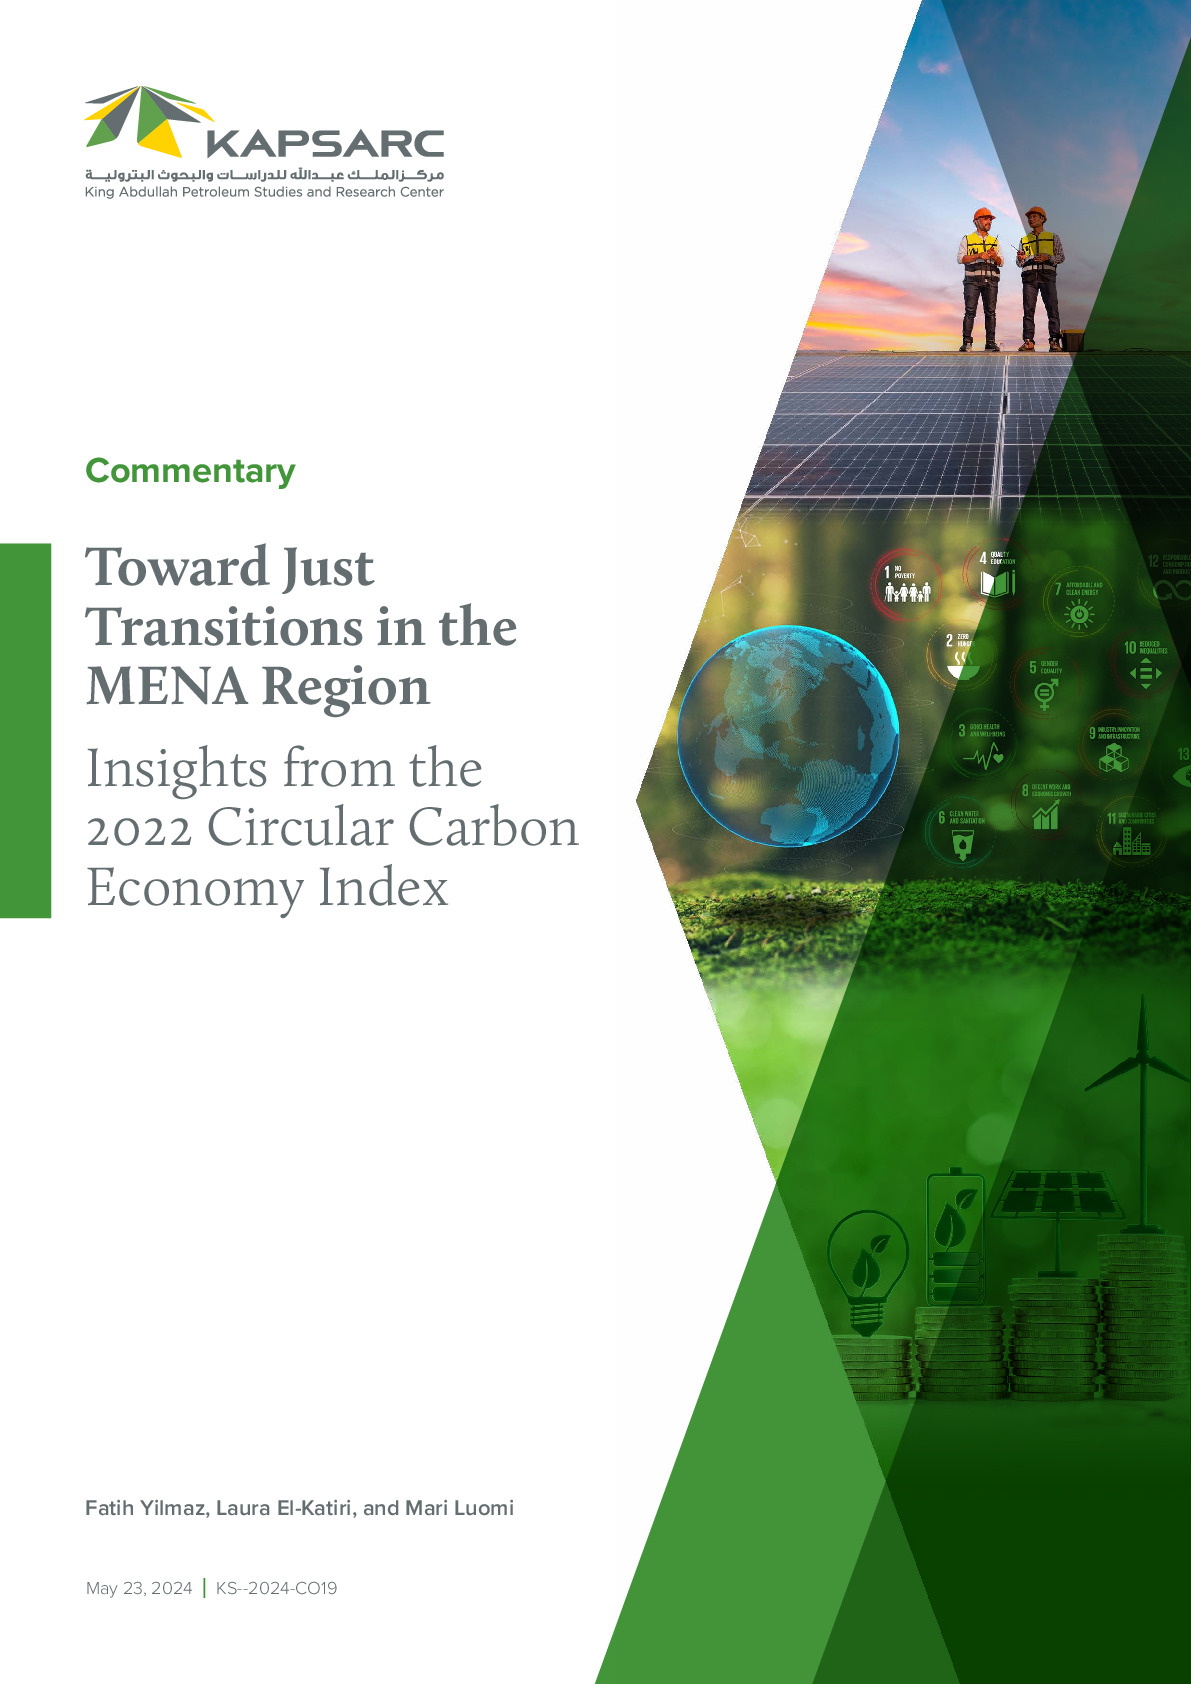 Toward Just Transitions in the MENA Region: Insights from the 2022 Circular Carbon Economy Index